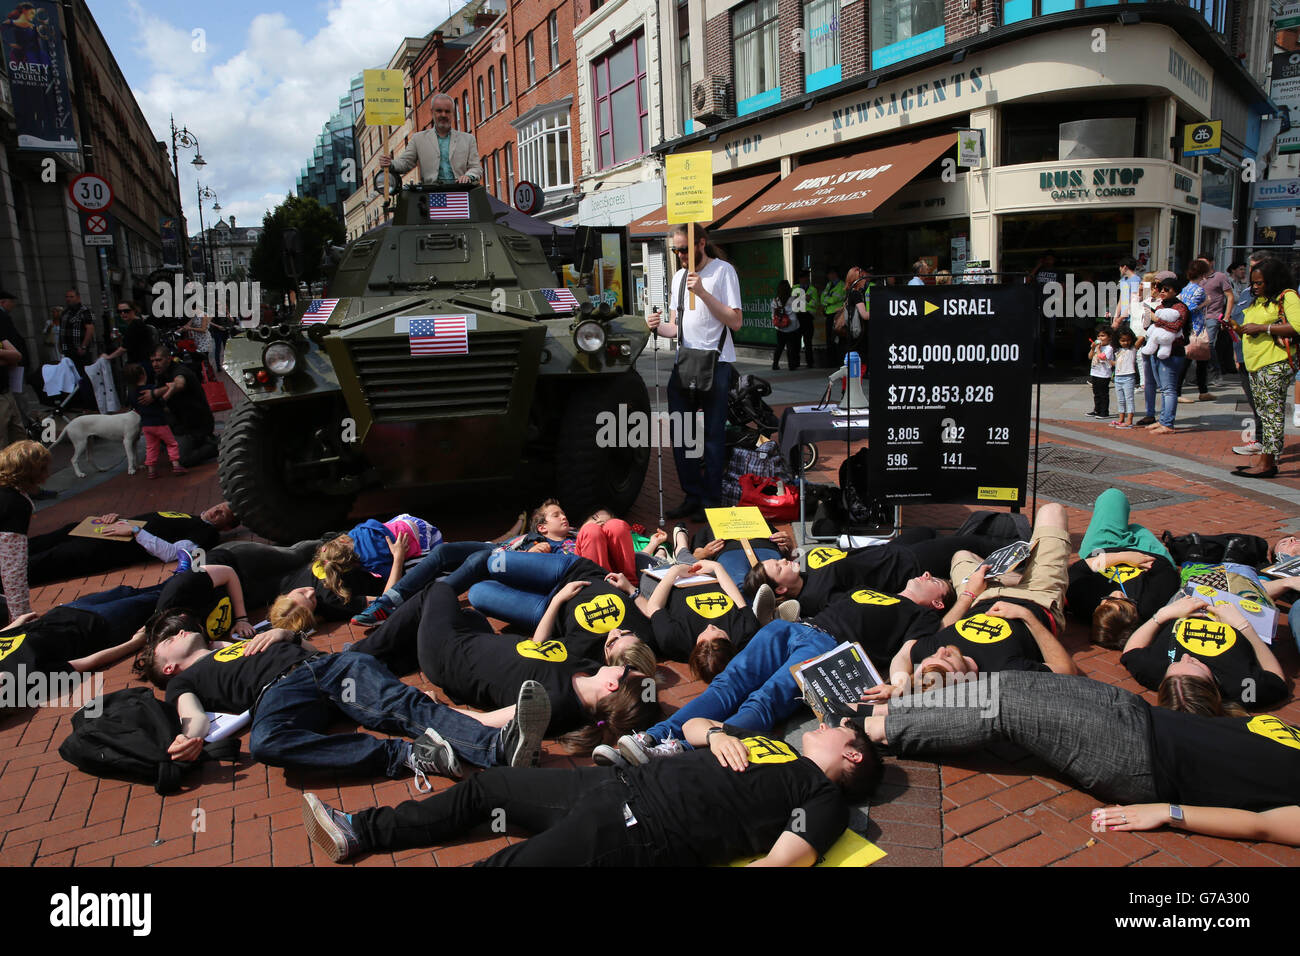 STANDALONE PHOTO. Volunteers take part in a Die in on Grafron Street, Dublin, where Amnesty International called on the US government to immediately end its ongoing deliveries of large quantities of arms to Israel, which are fuelling serious violations of international law in Gaza. Stock Photo